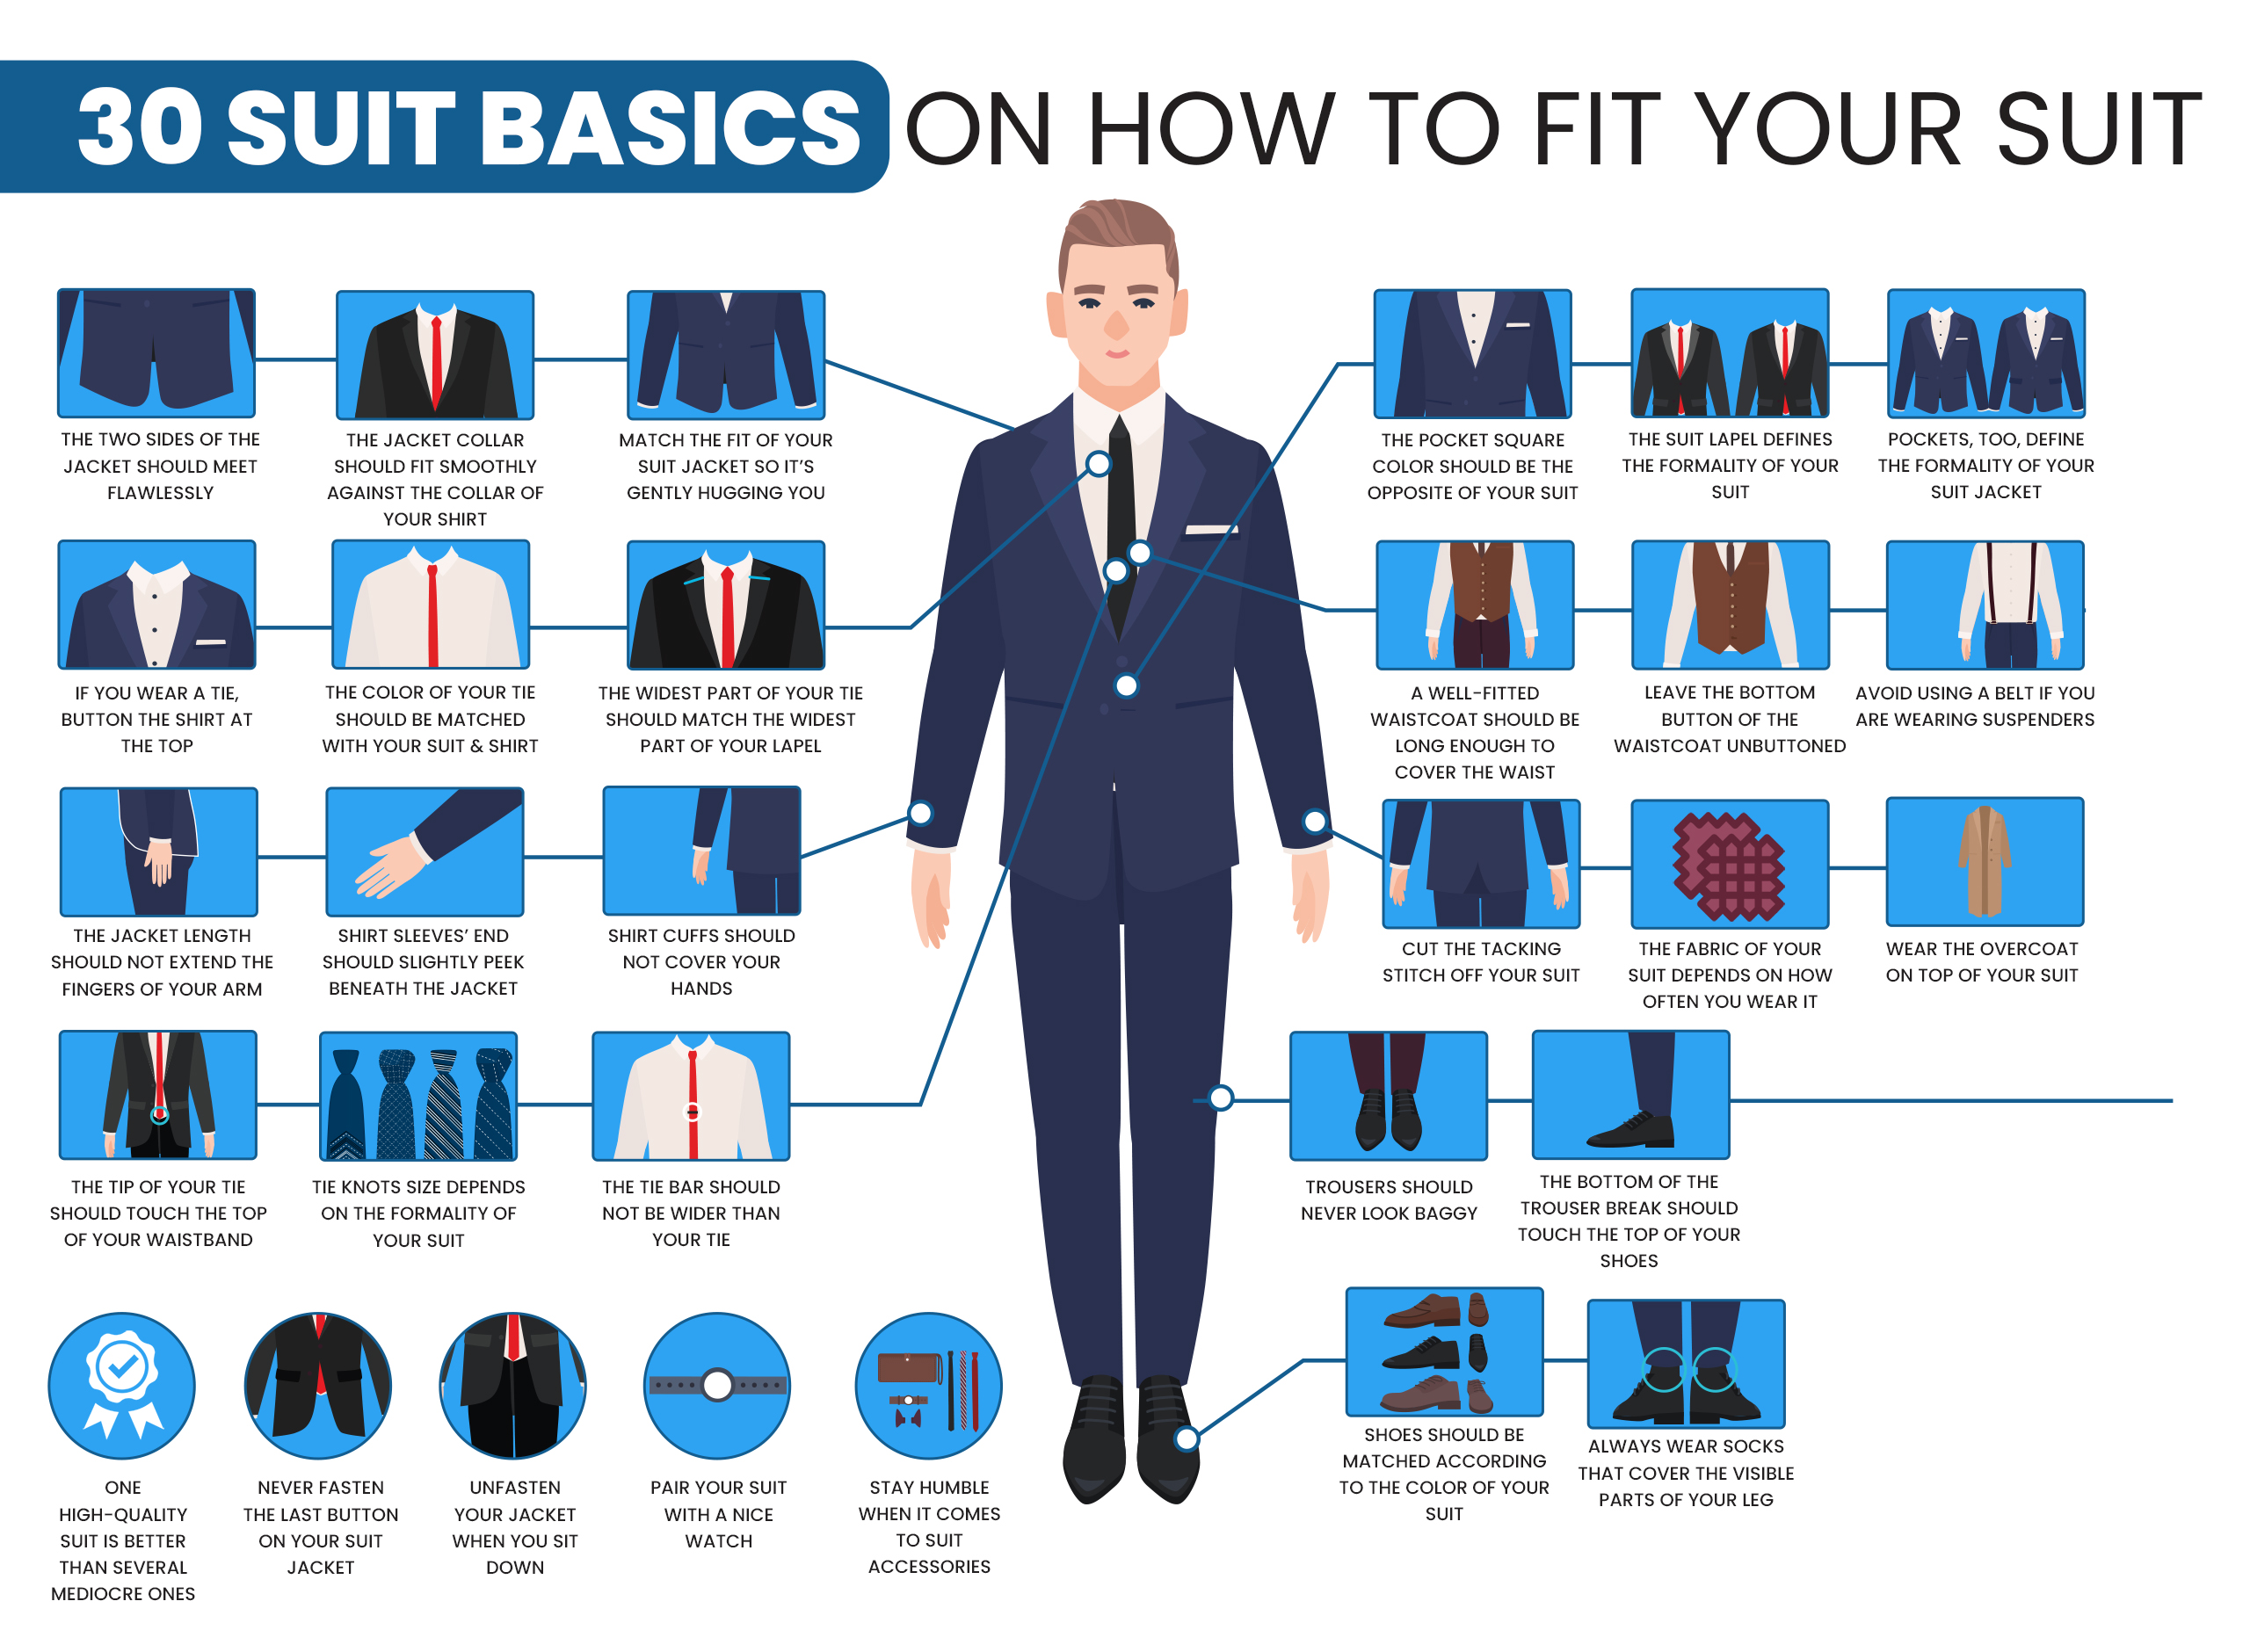 30 suit basics on how to fit your suit